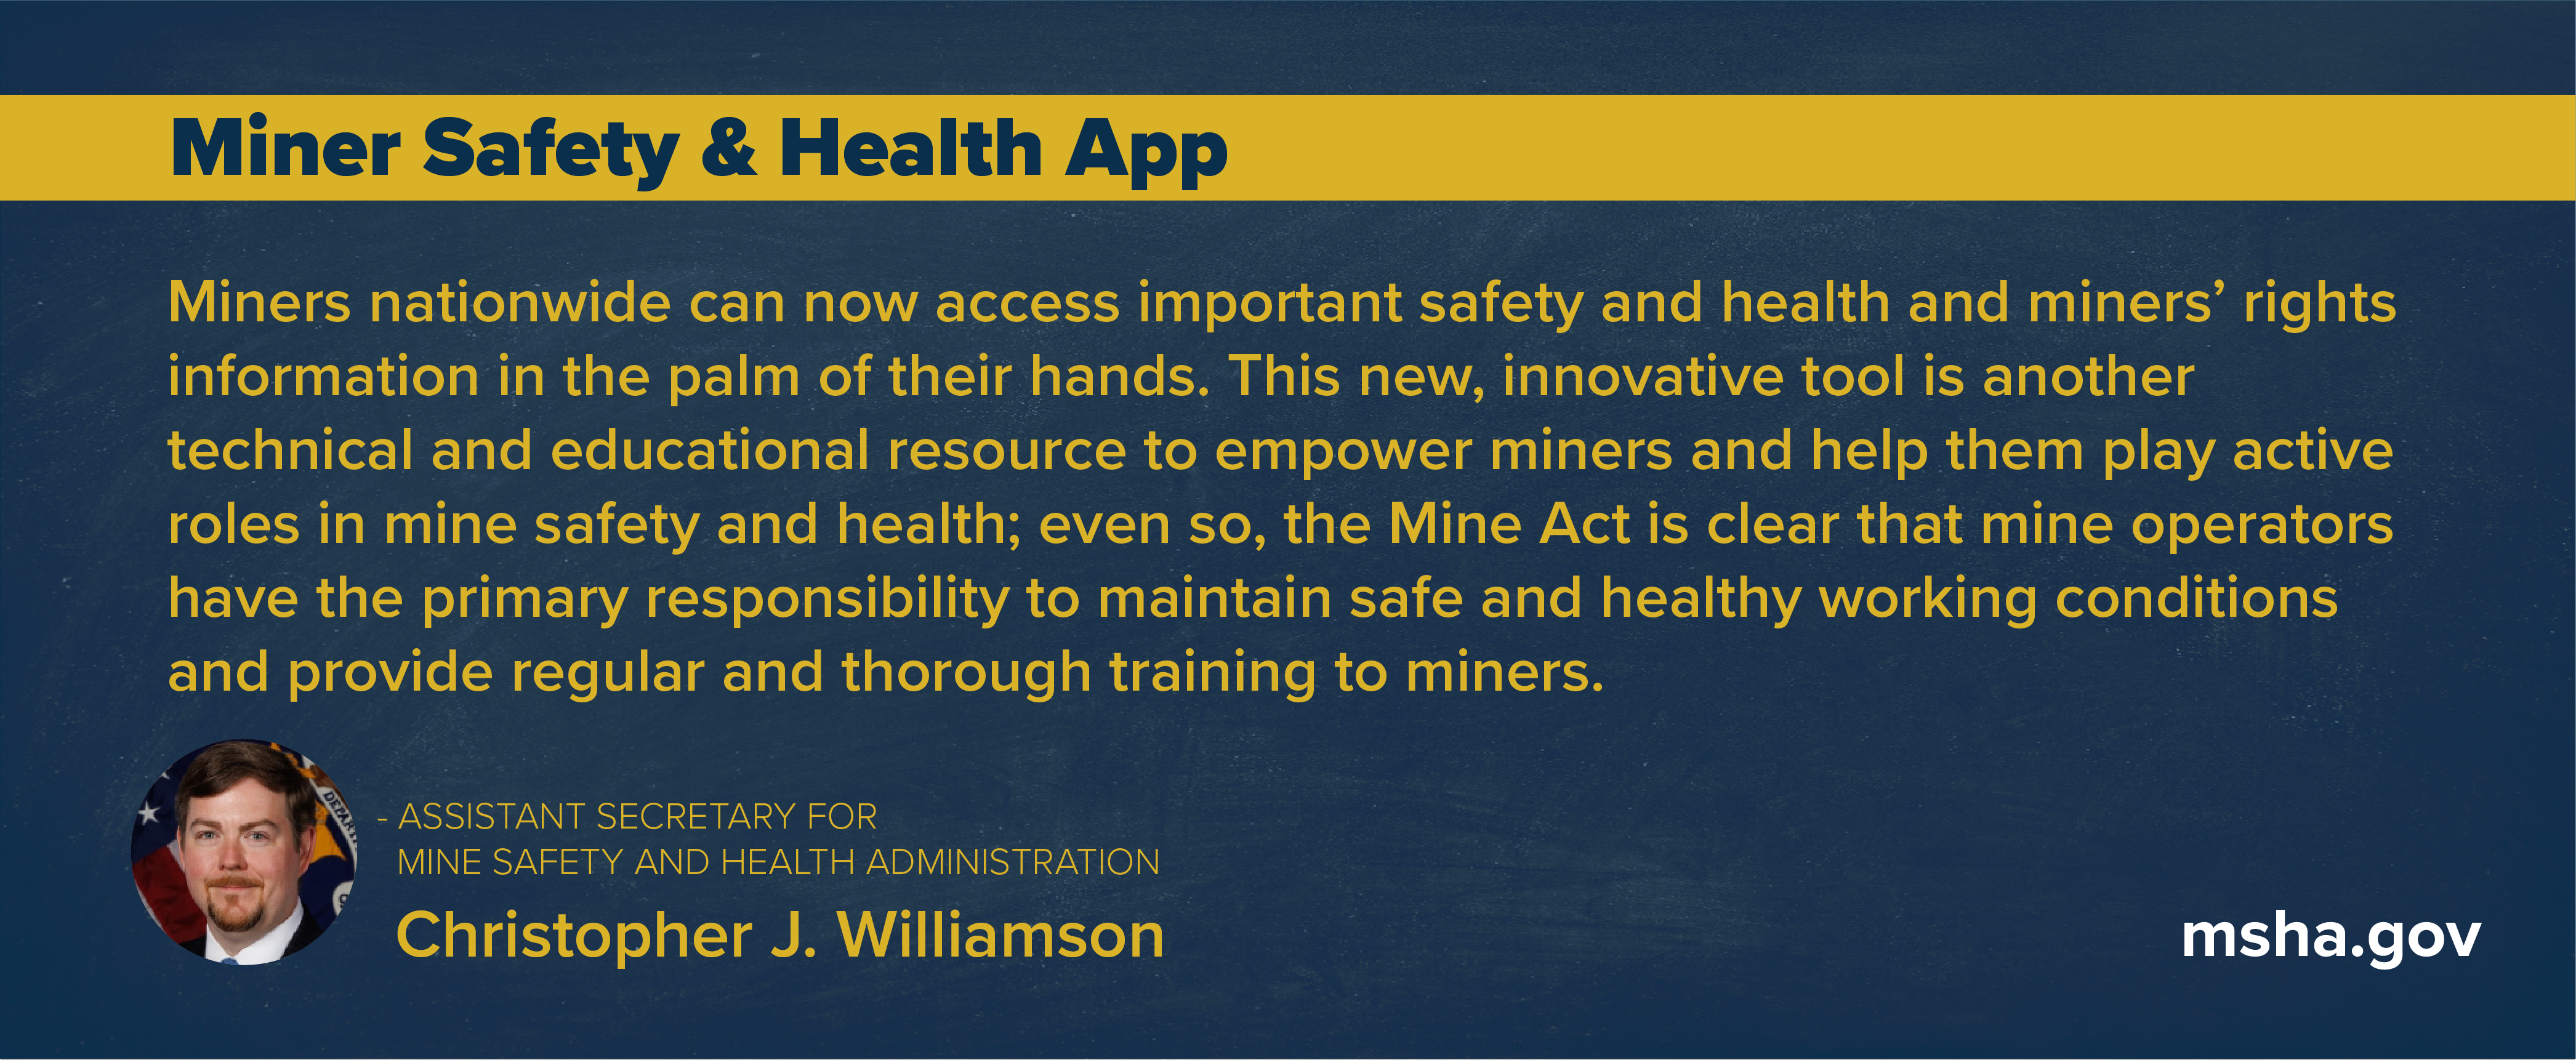 New Mine Safety and Health Application for miners